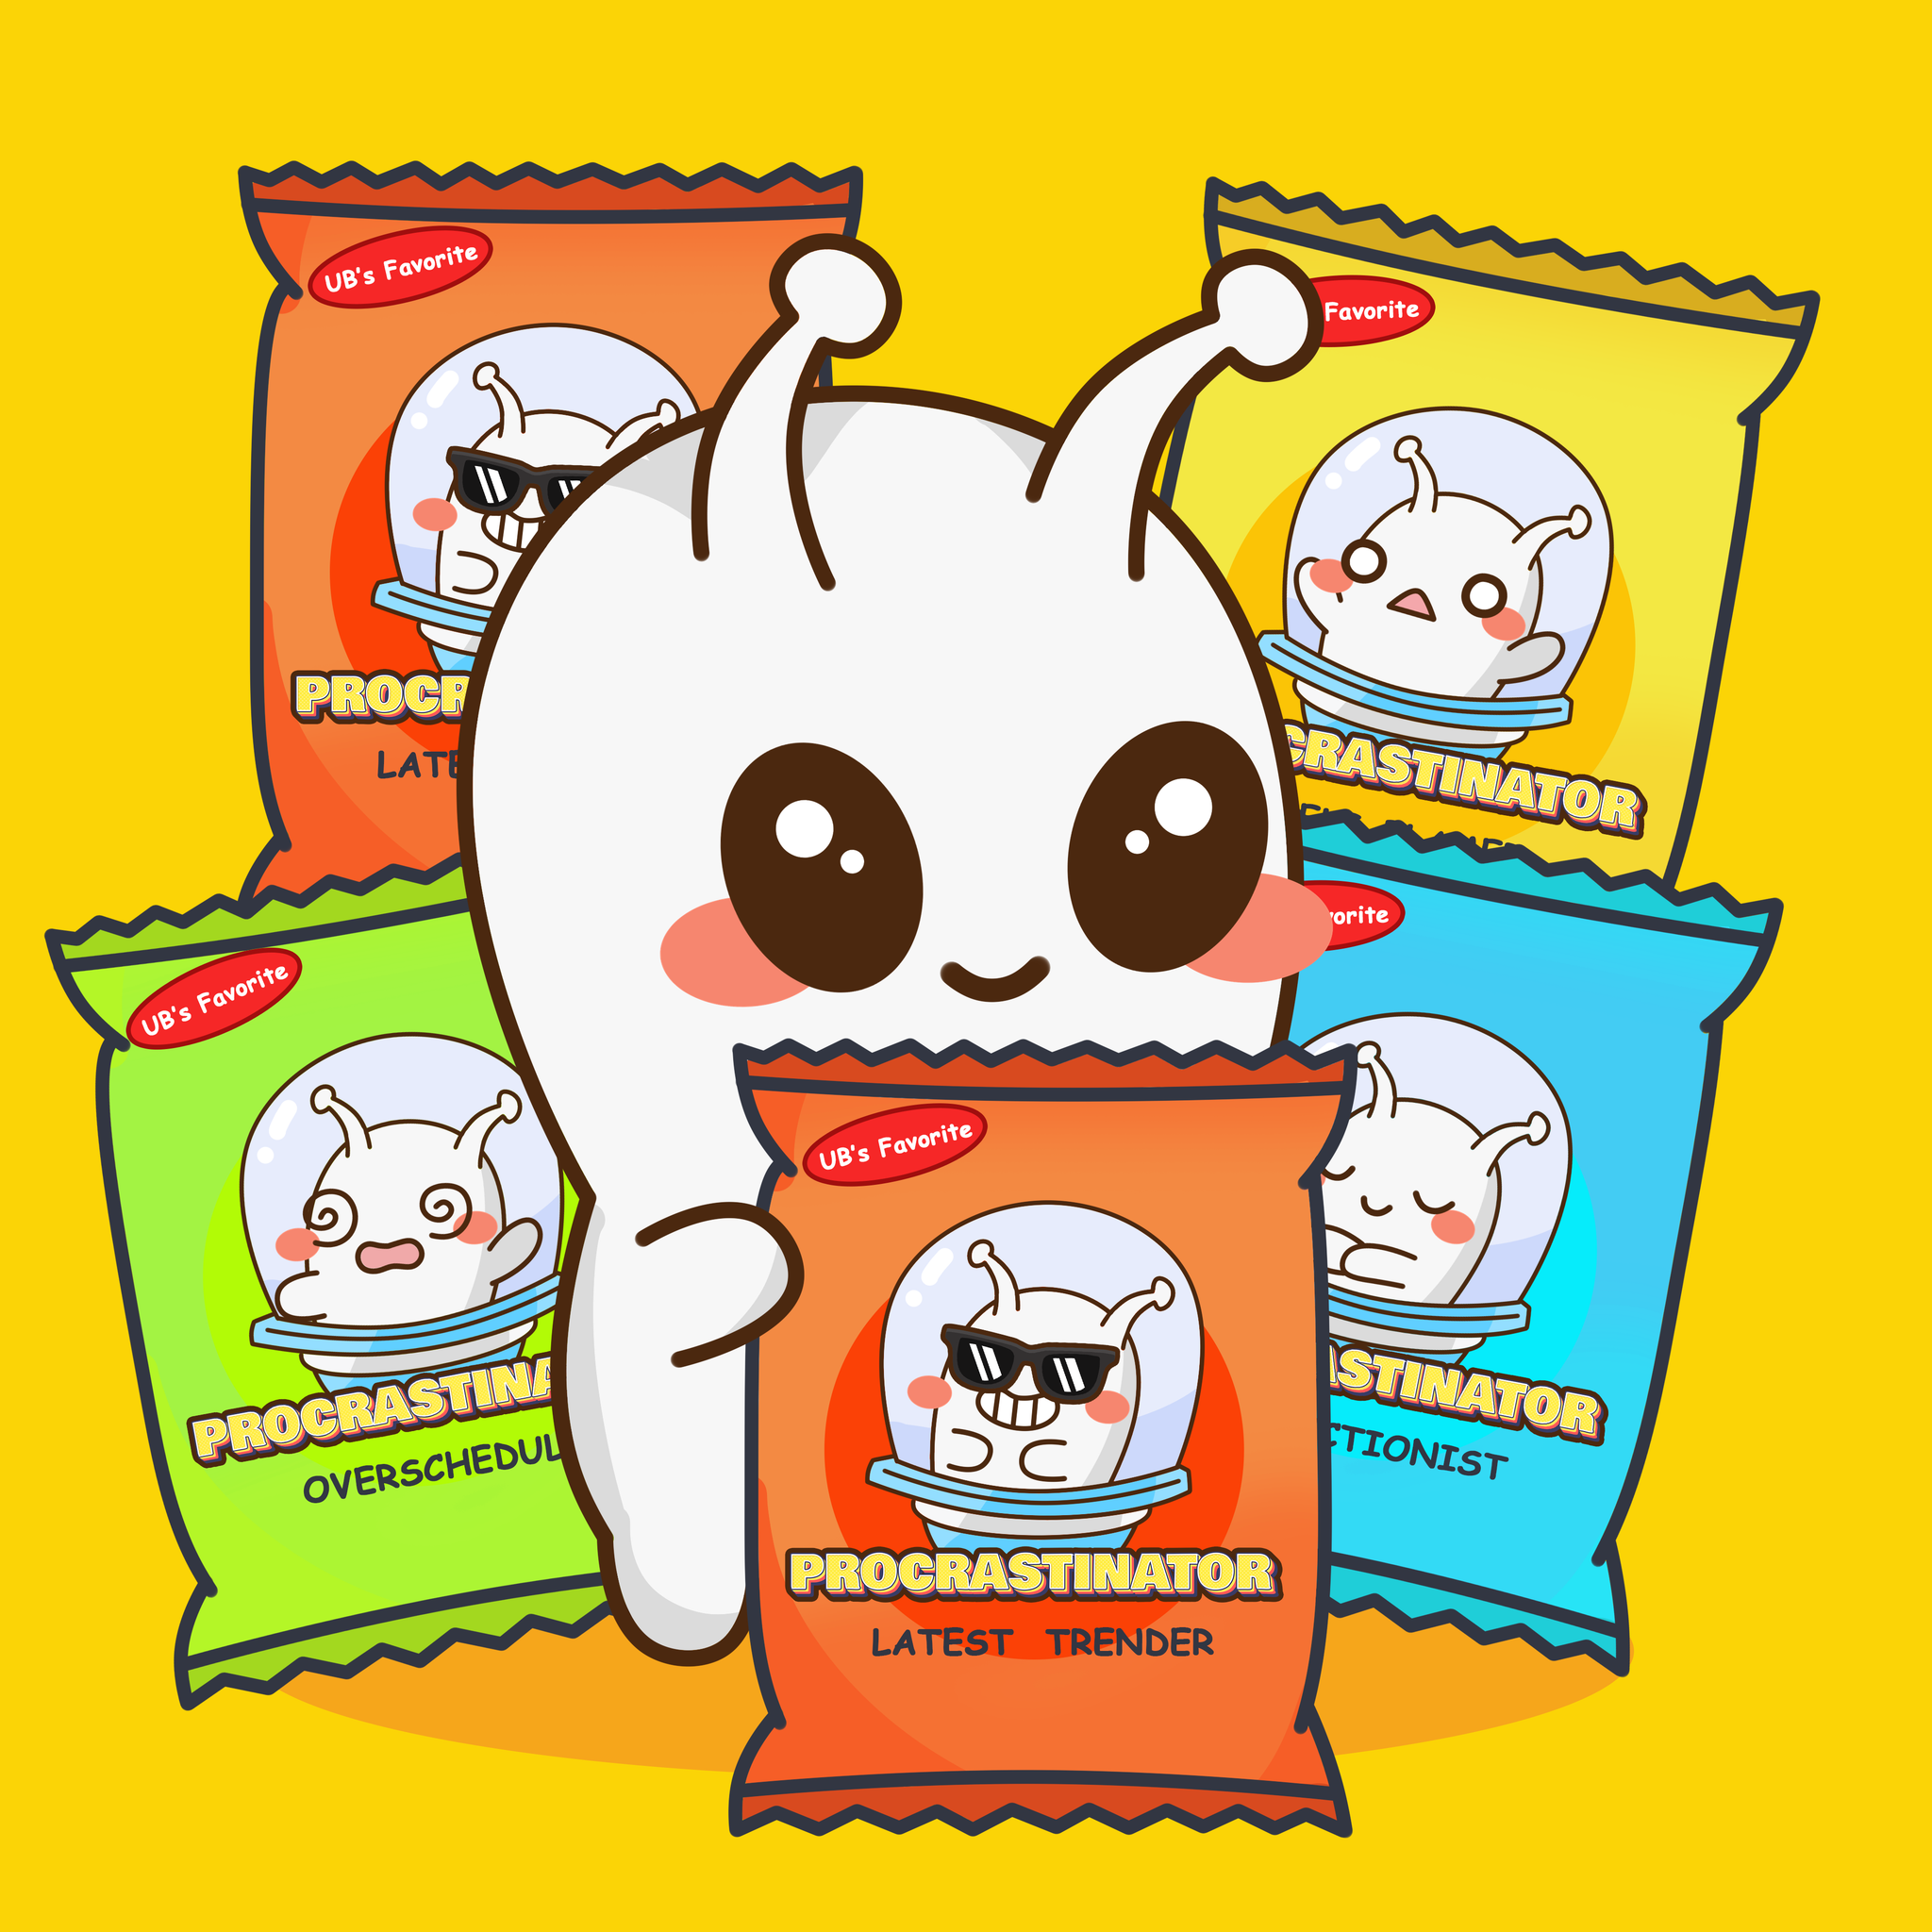 Unfinished Business' Favorite Snack - Procrastinator Variety Pack! What's Your Favorite?